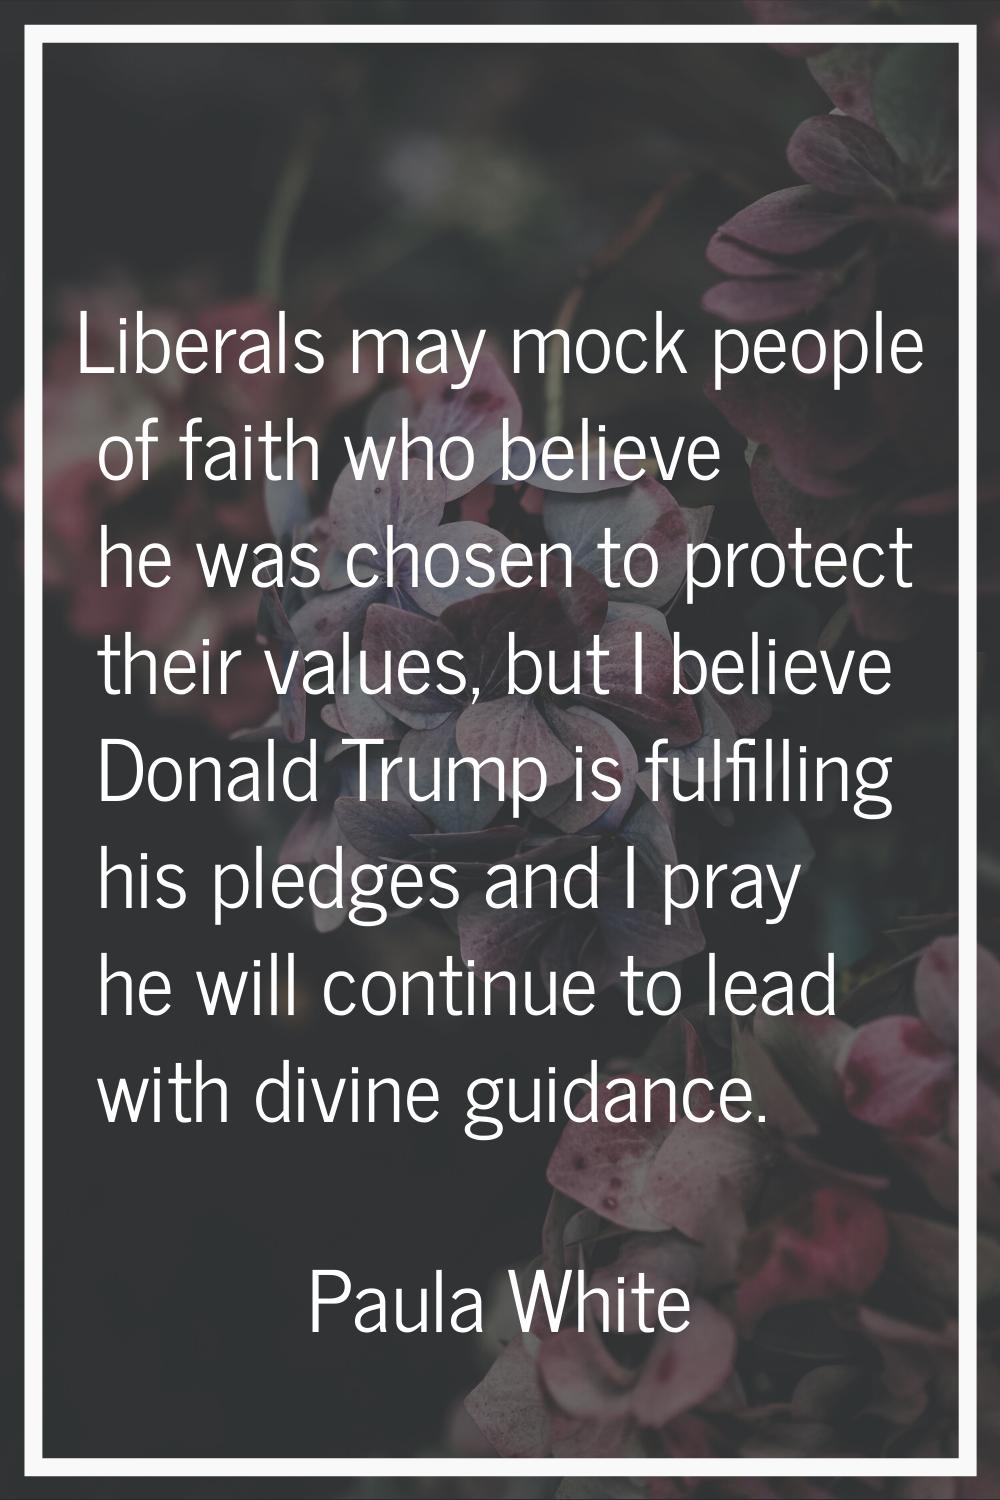 Liberals may mock people of faith who believe he was chosen to protect their values, but I believe 